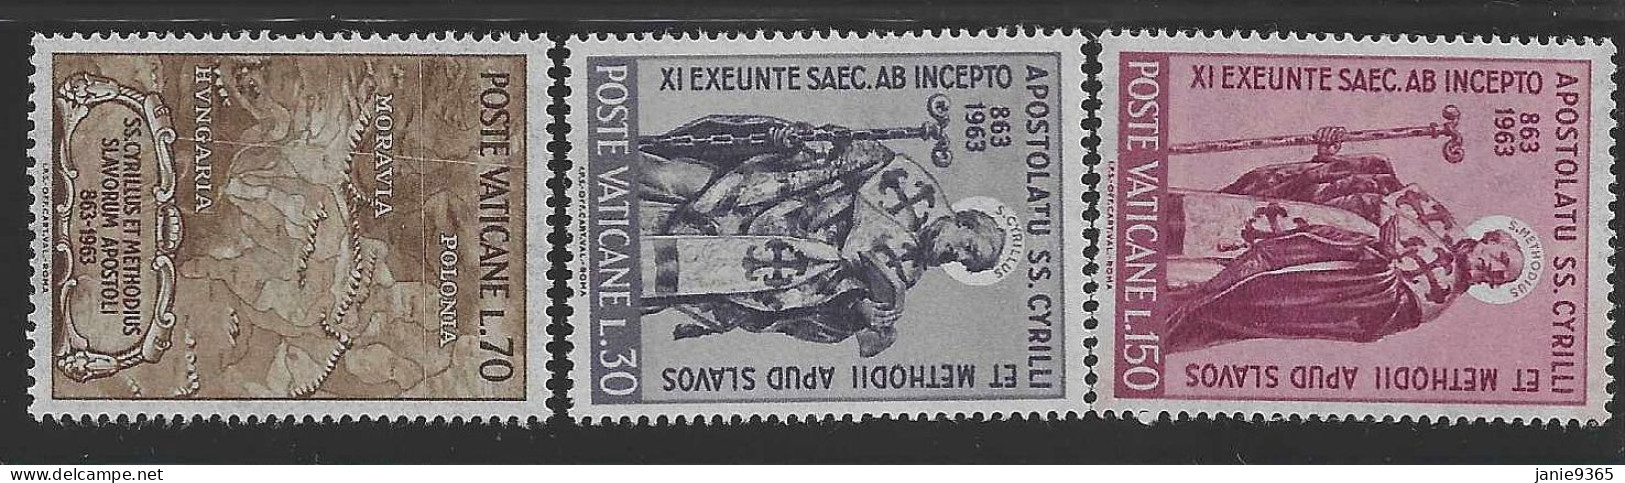 Vatican City S 382-384 1963 St Cyril And Methodius.mint Never Hinged - Unused Stamps